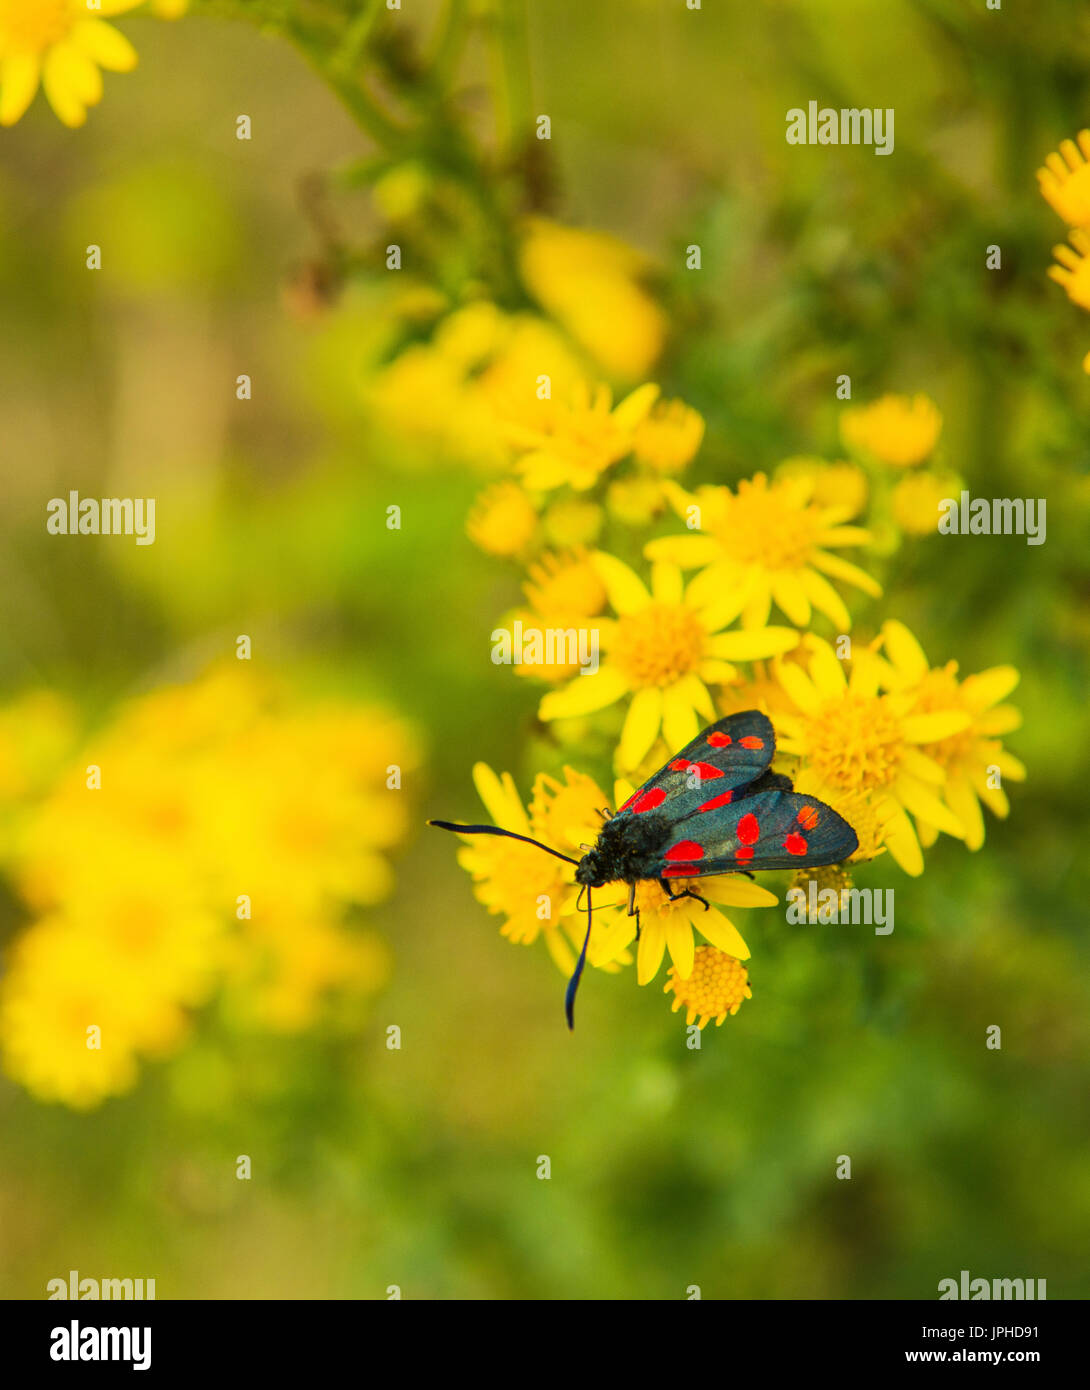 Black and red Spotted Burnet Moth on Ragwort Stock Photo